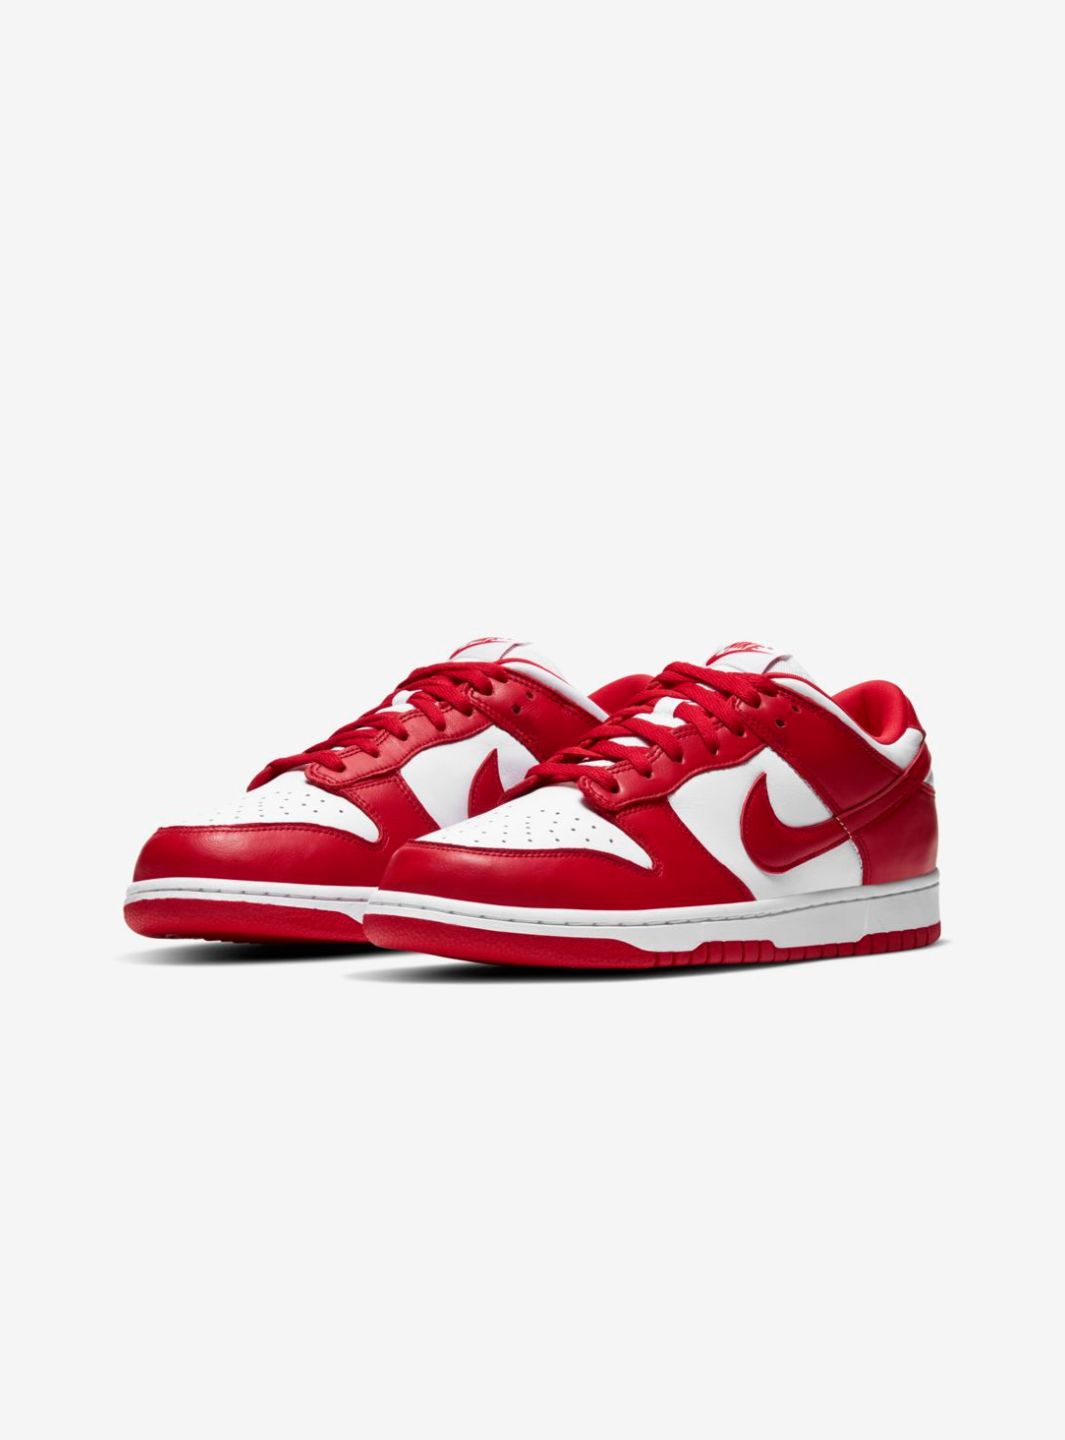 Nike Dunk Low SP St. John's (2020) - CU1727-100 | ResellZone